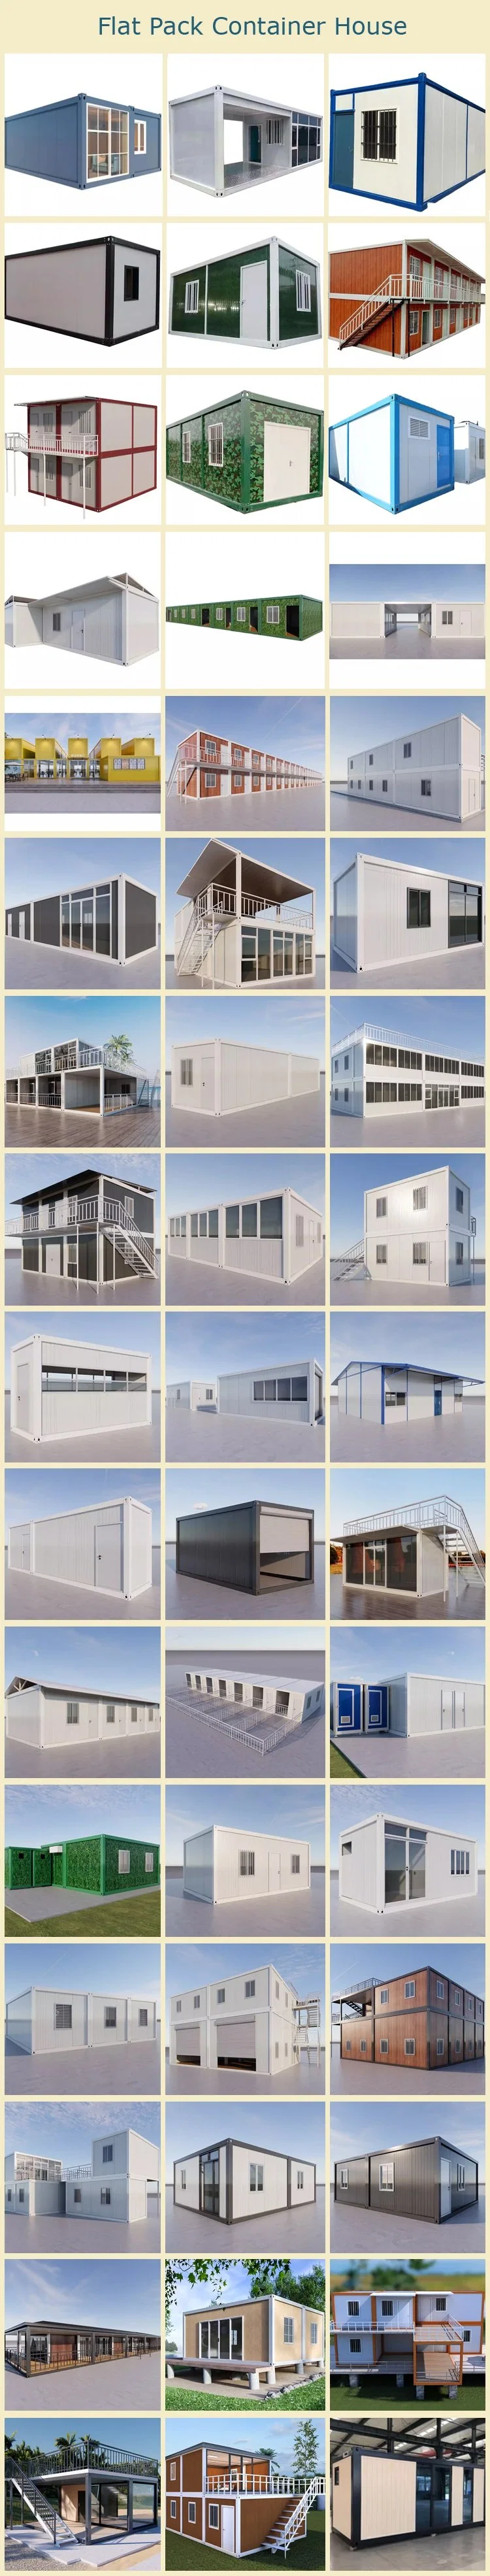 Container House for Office Accommodation Camp Kitchen Toilet Clinic Ablution Hospital Container